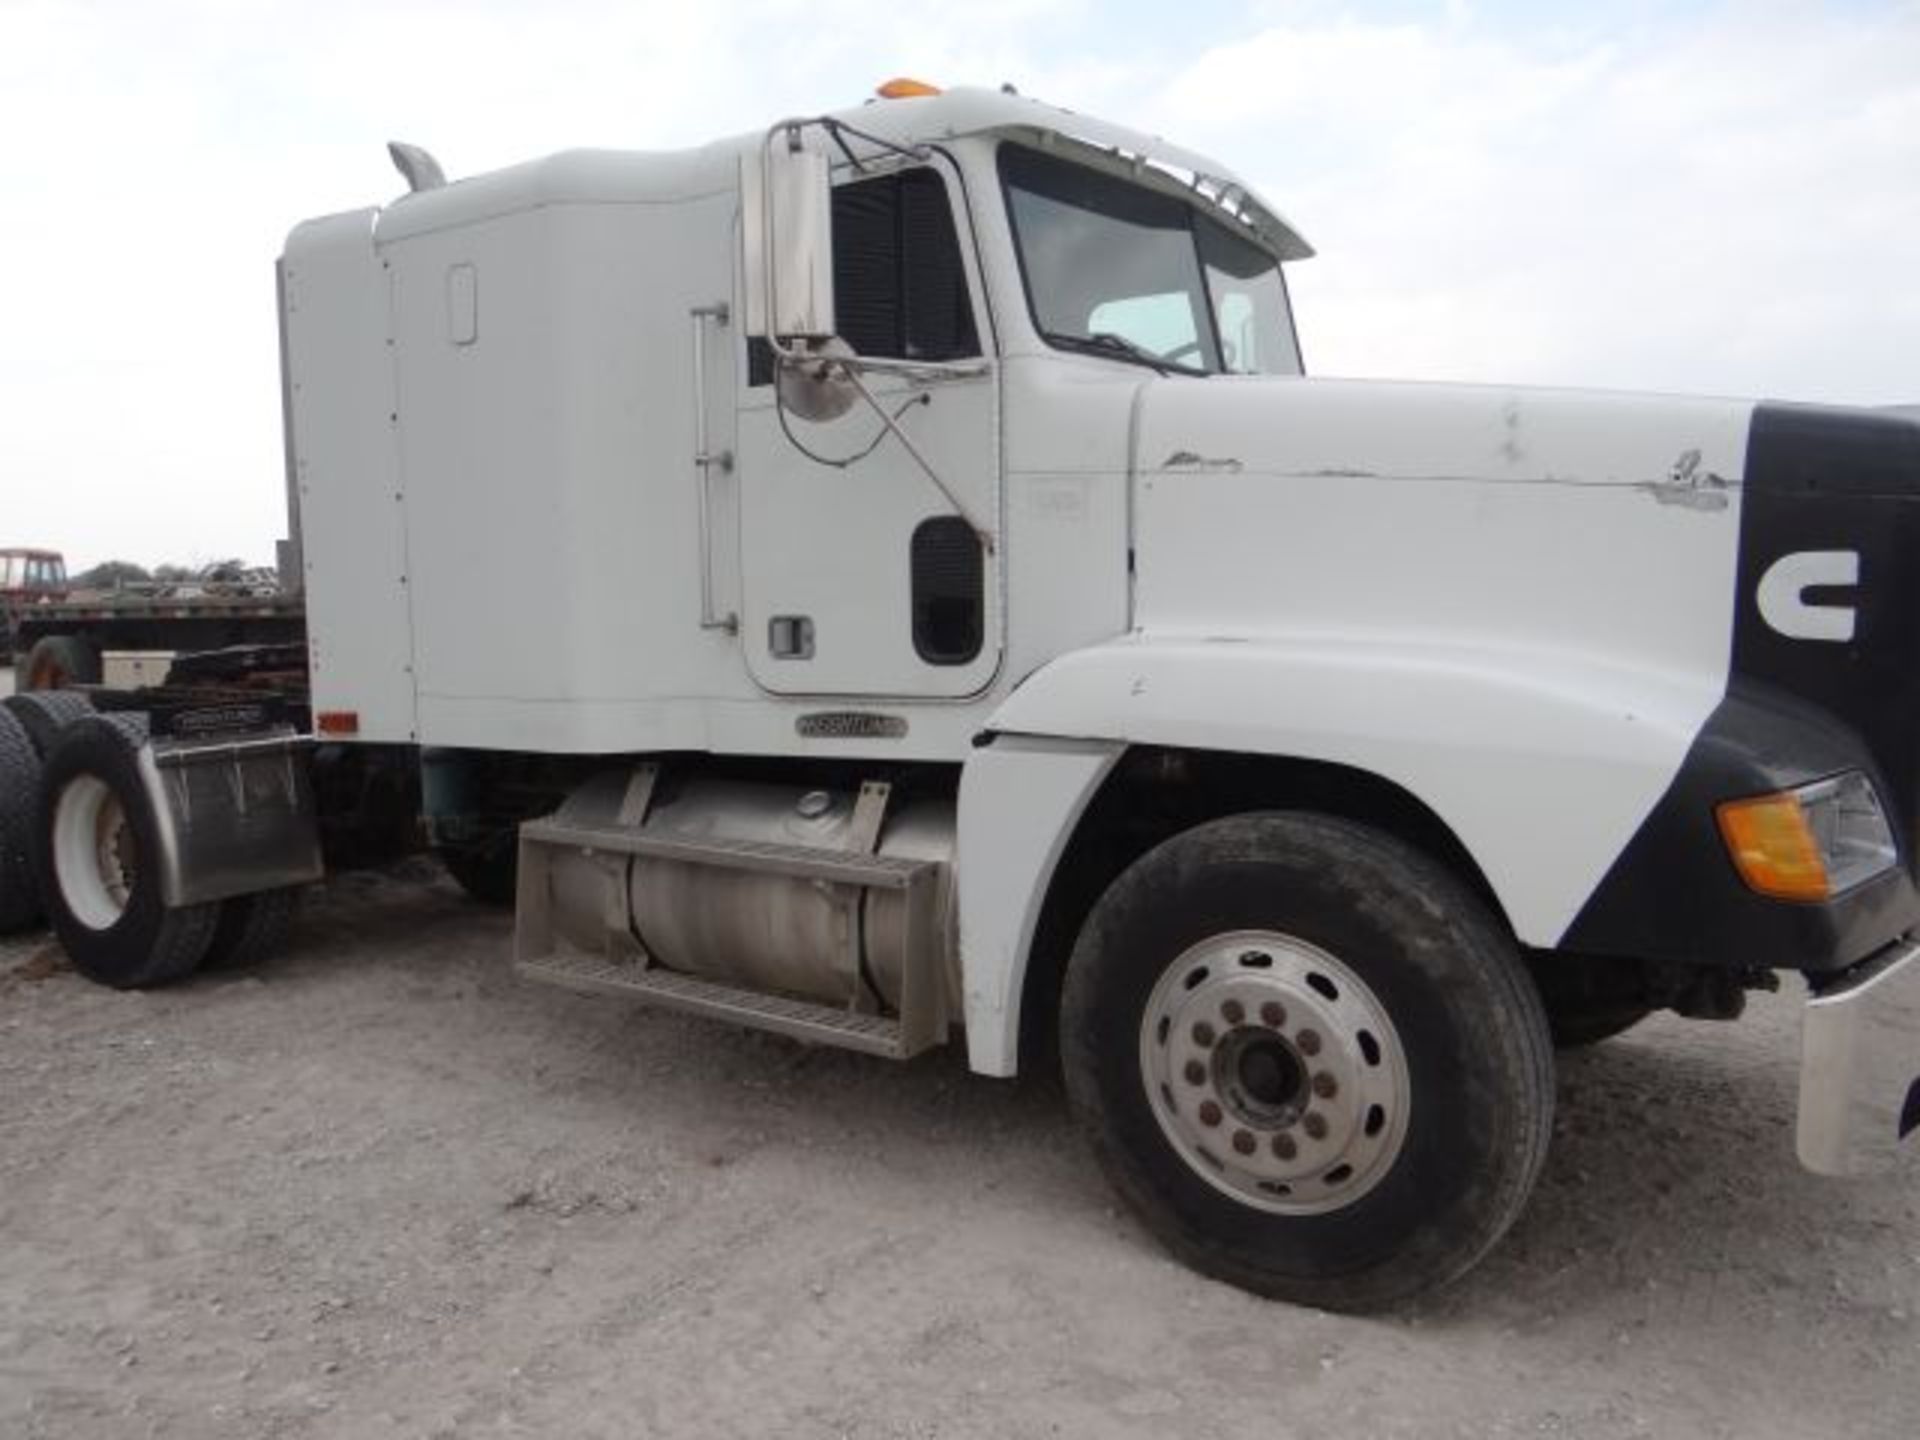 1993 Freightliner Semi Truck N-14 Cummins, Heavy Axles, Cold A/C, 9 Speed, TITLE IN OFFICE - Image 4 of 5